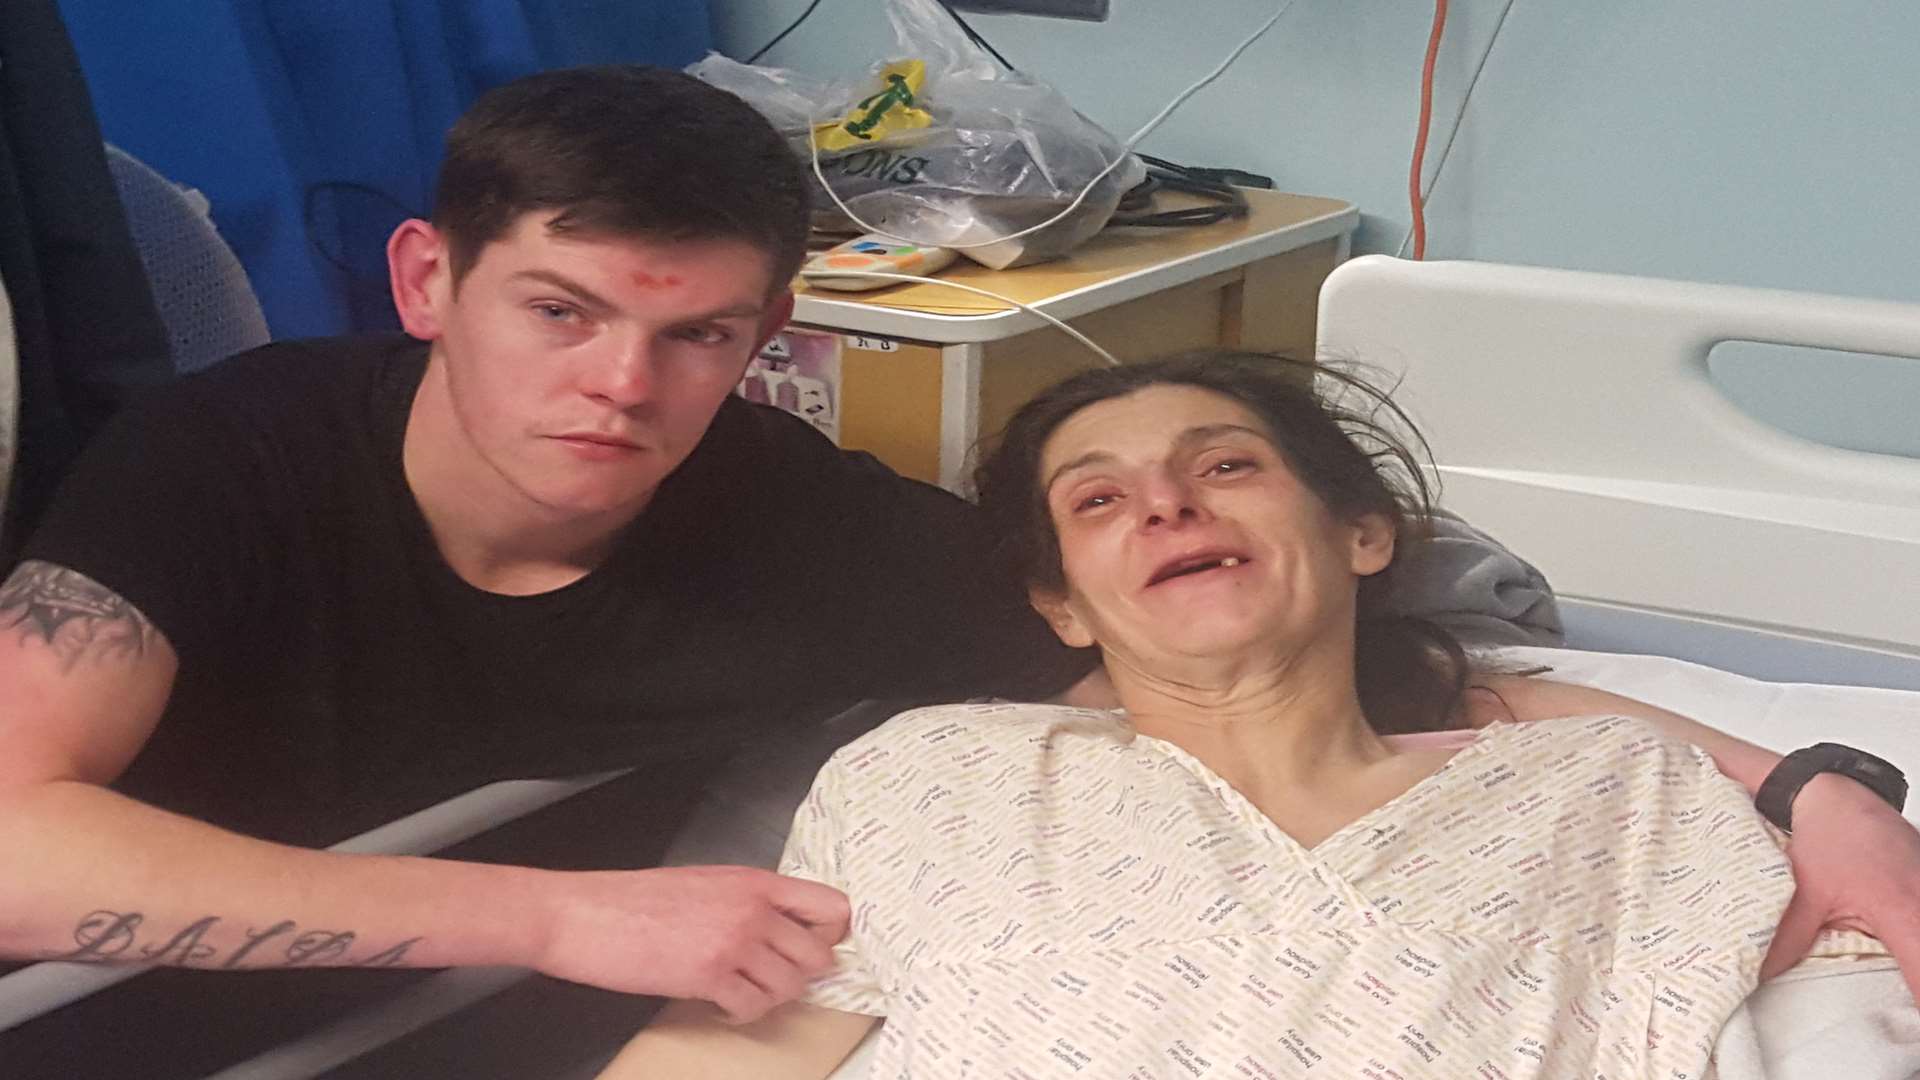 Ryan Richardson, 24, and mum Anita Richardson, who has been given weeks to live after a late cancer diagnosis